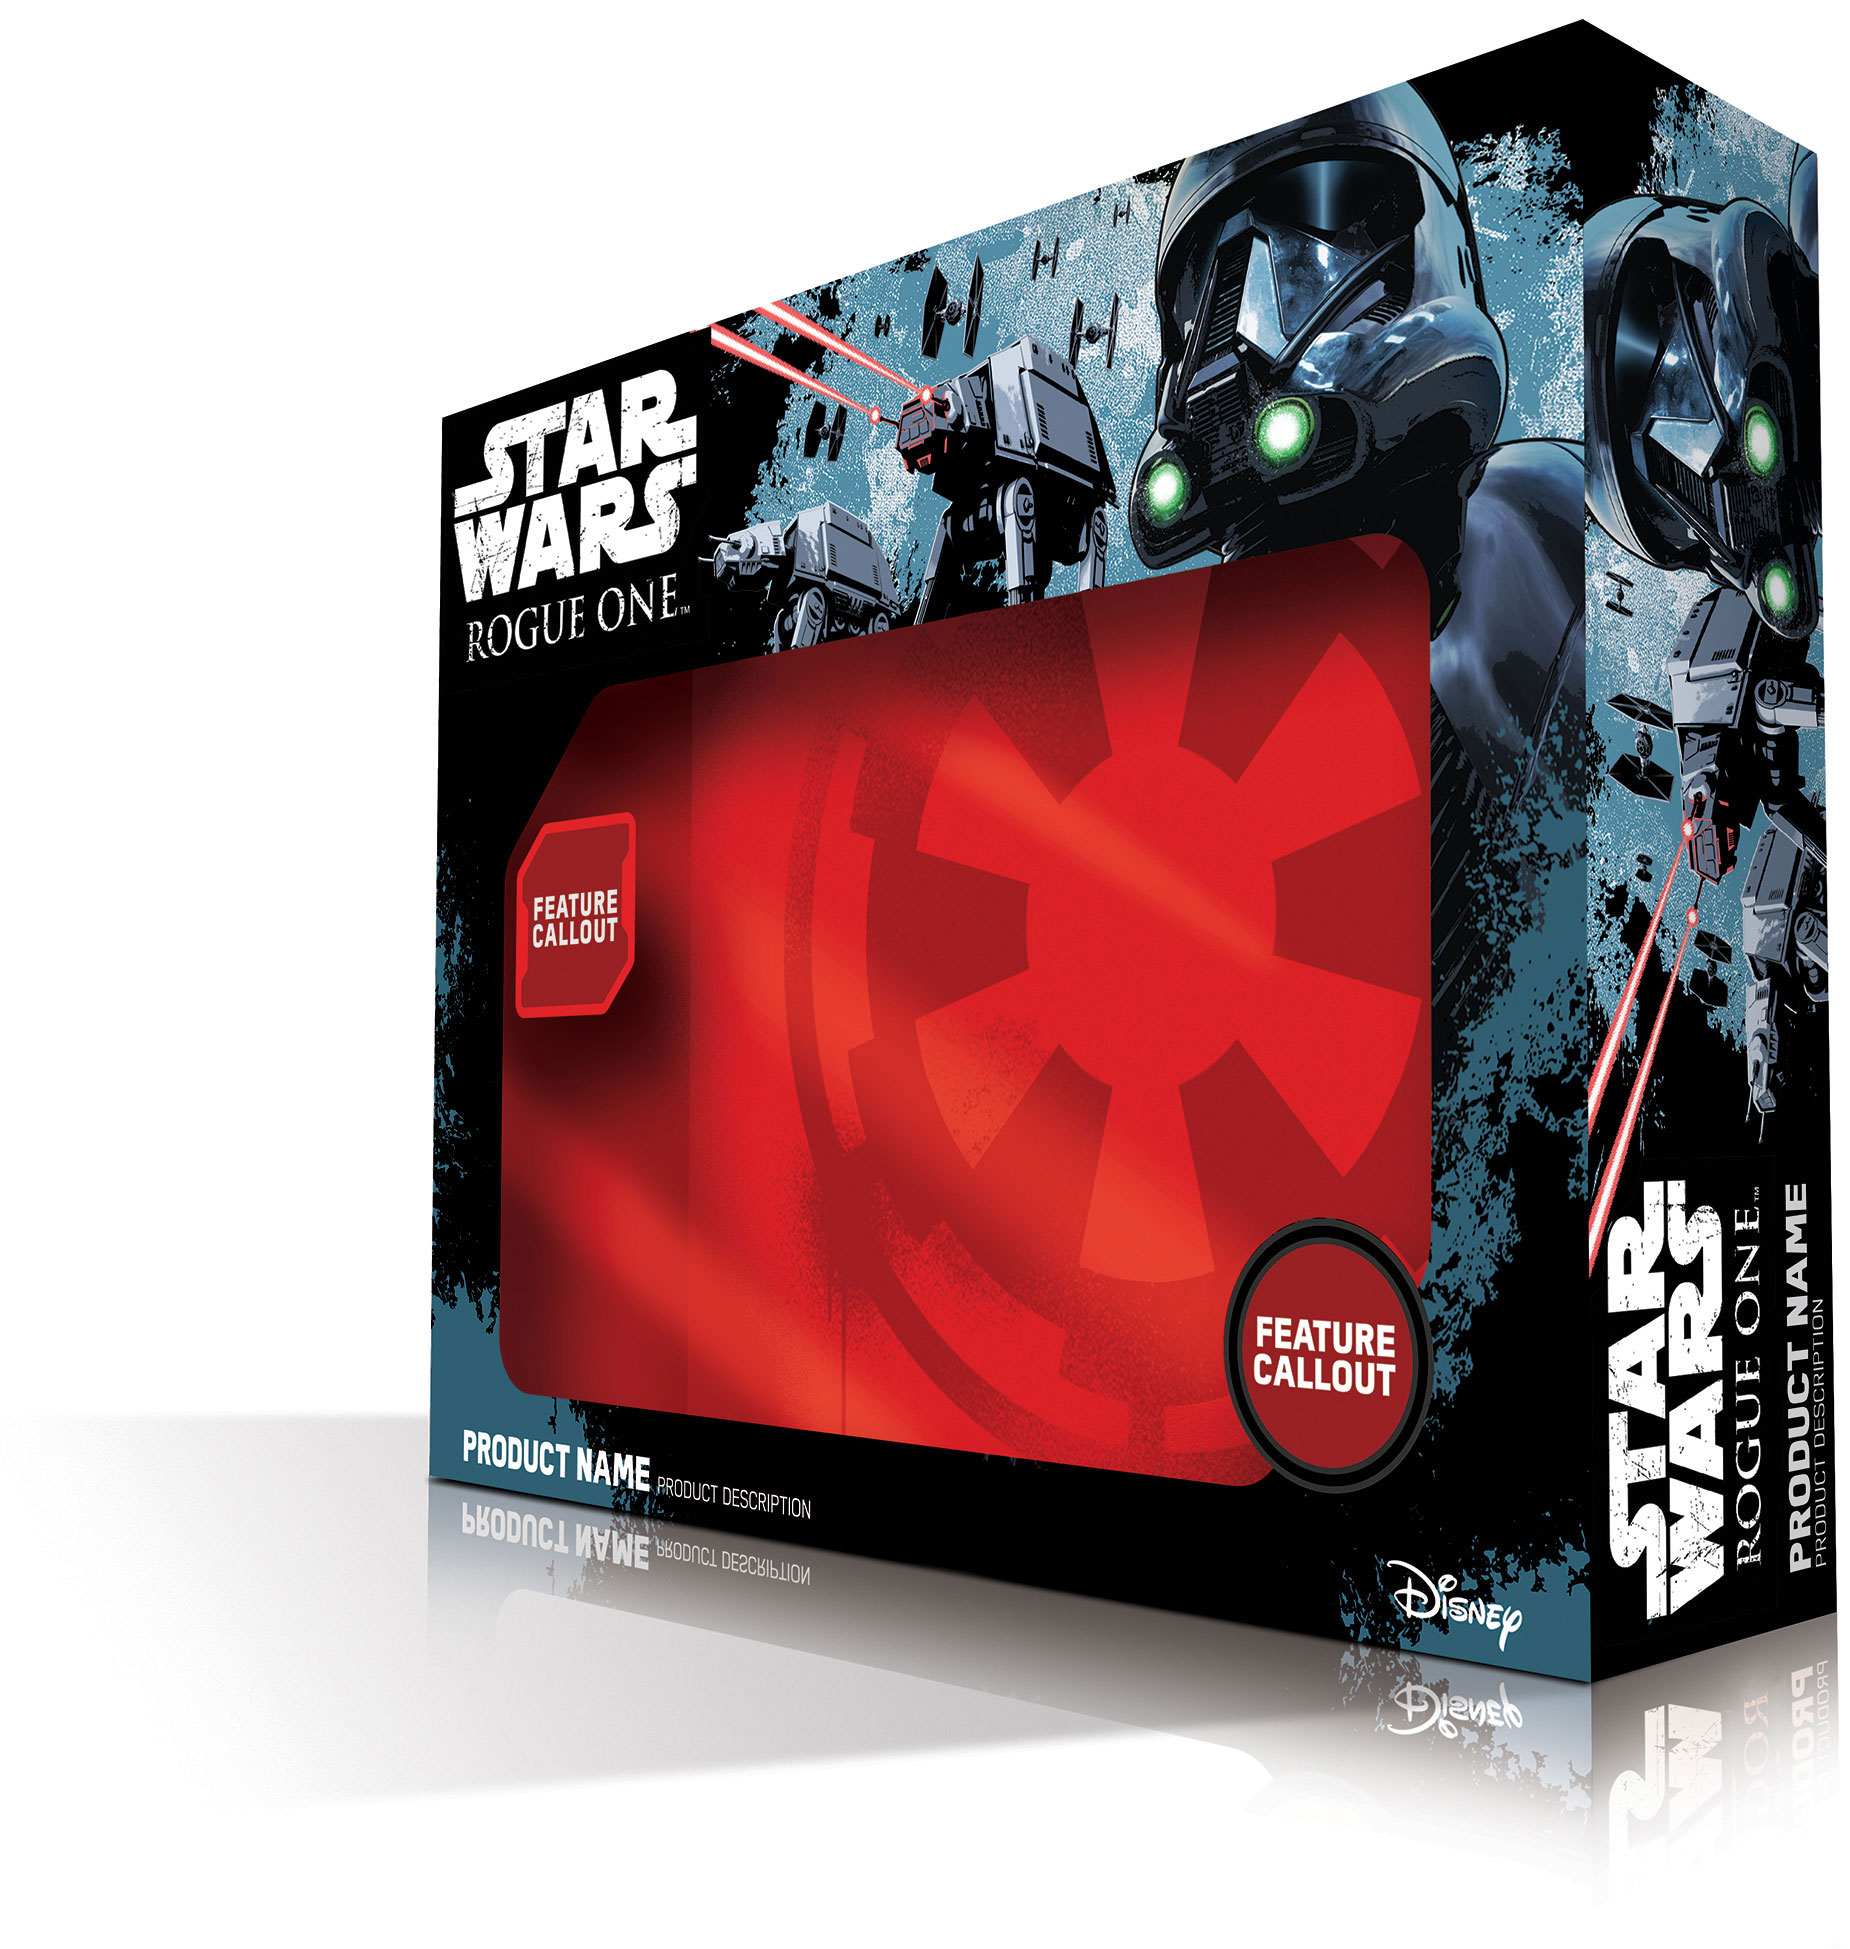 Star Wars Rogue One Toy Packaging